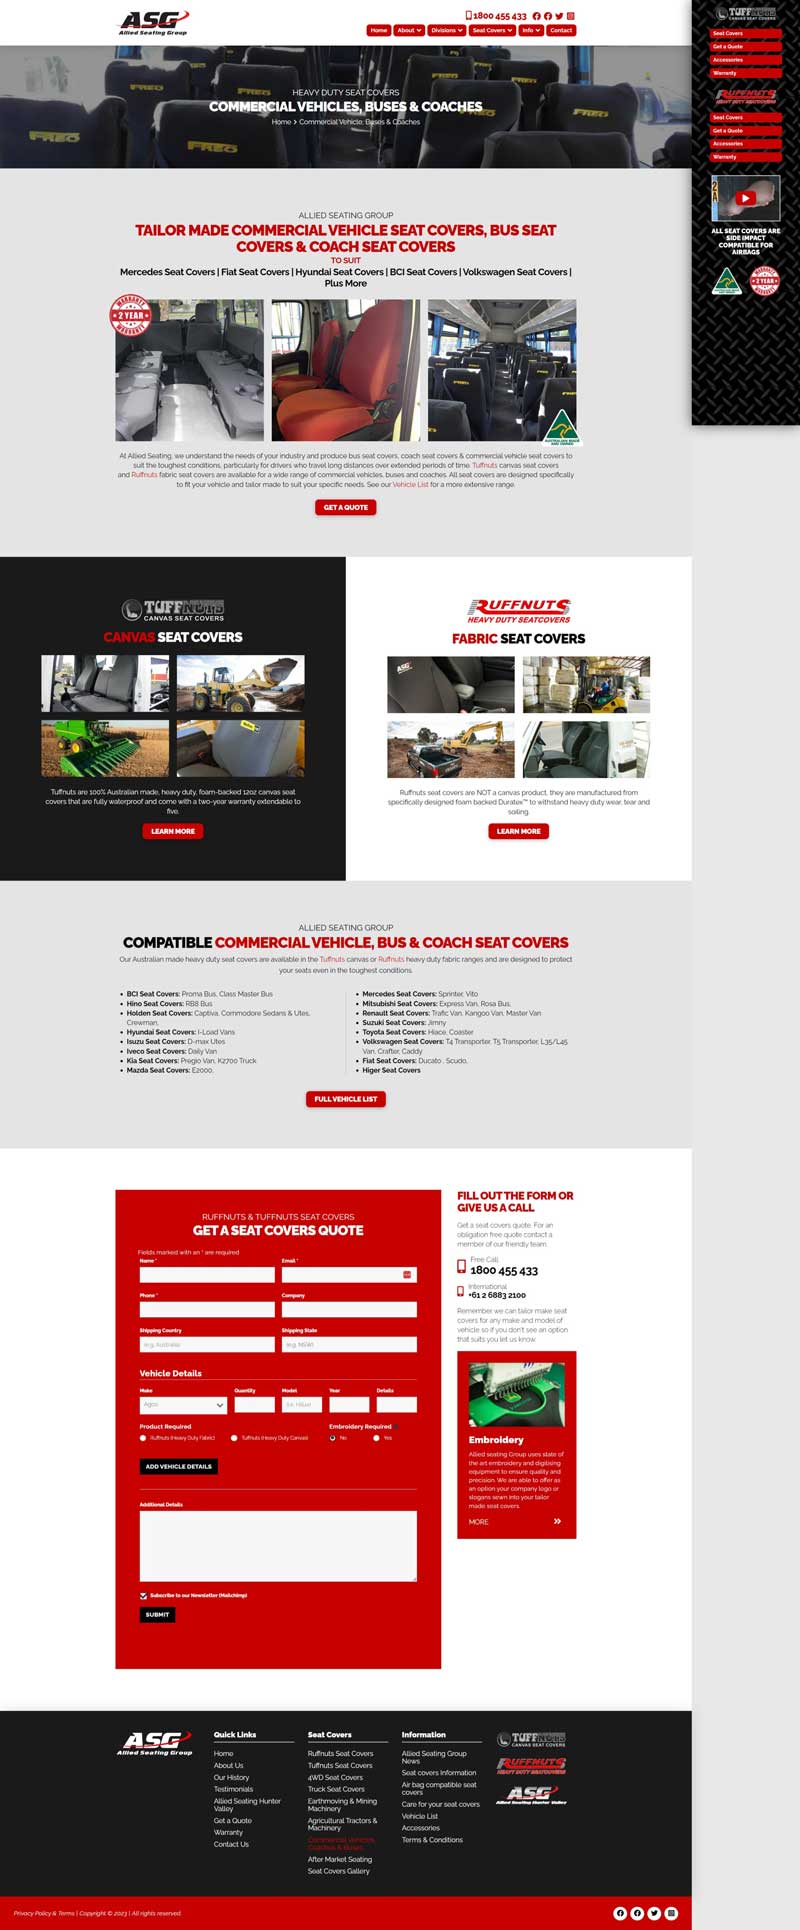 Allied Seating website designed by Big Red Bus Websites - ezample 1